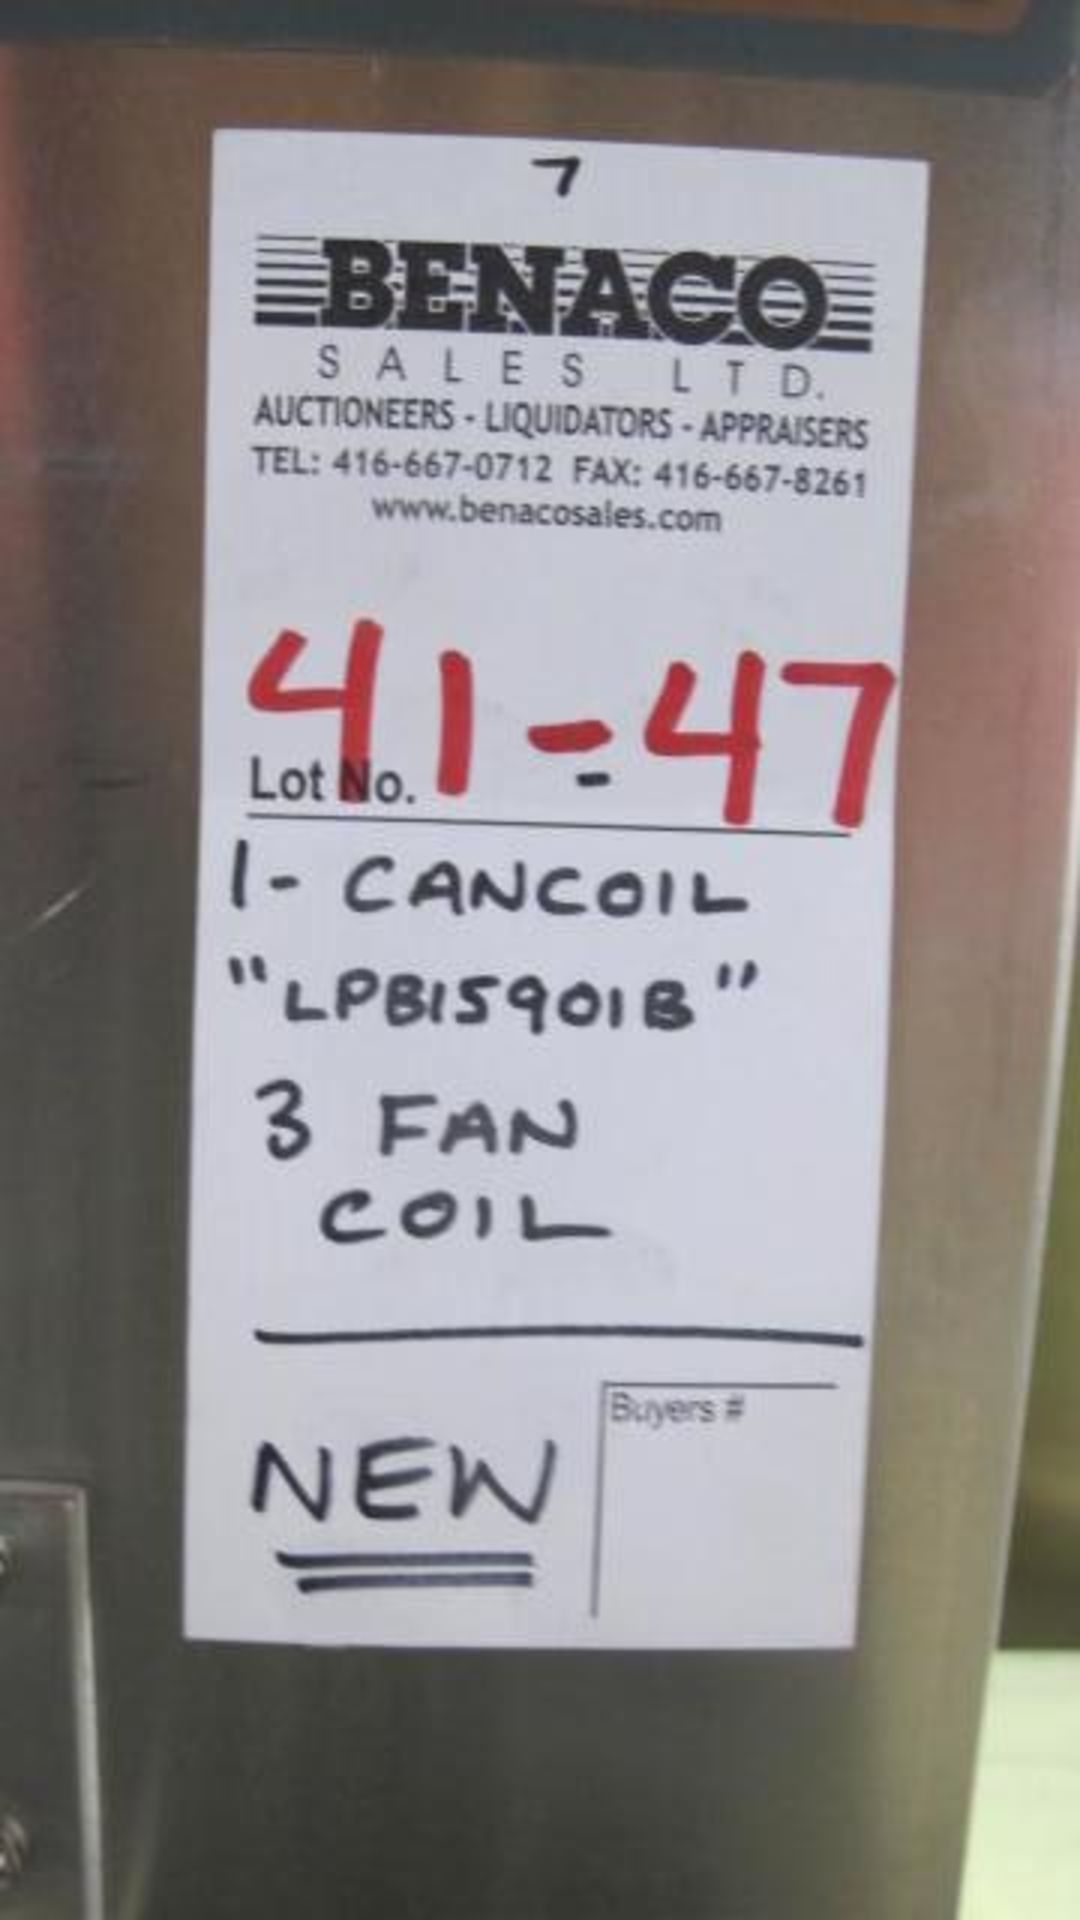 1X, NEW CANCOIL LPB15901B, 3 FAN COIL - Image 6 of 6